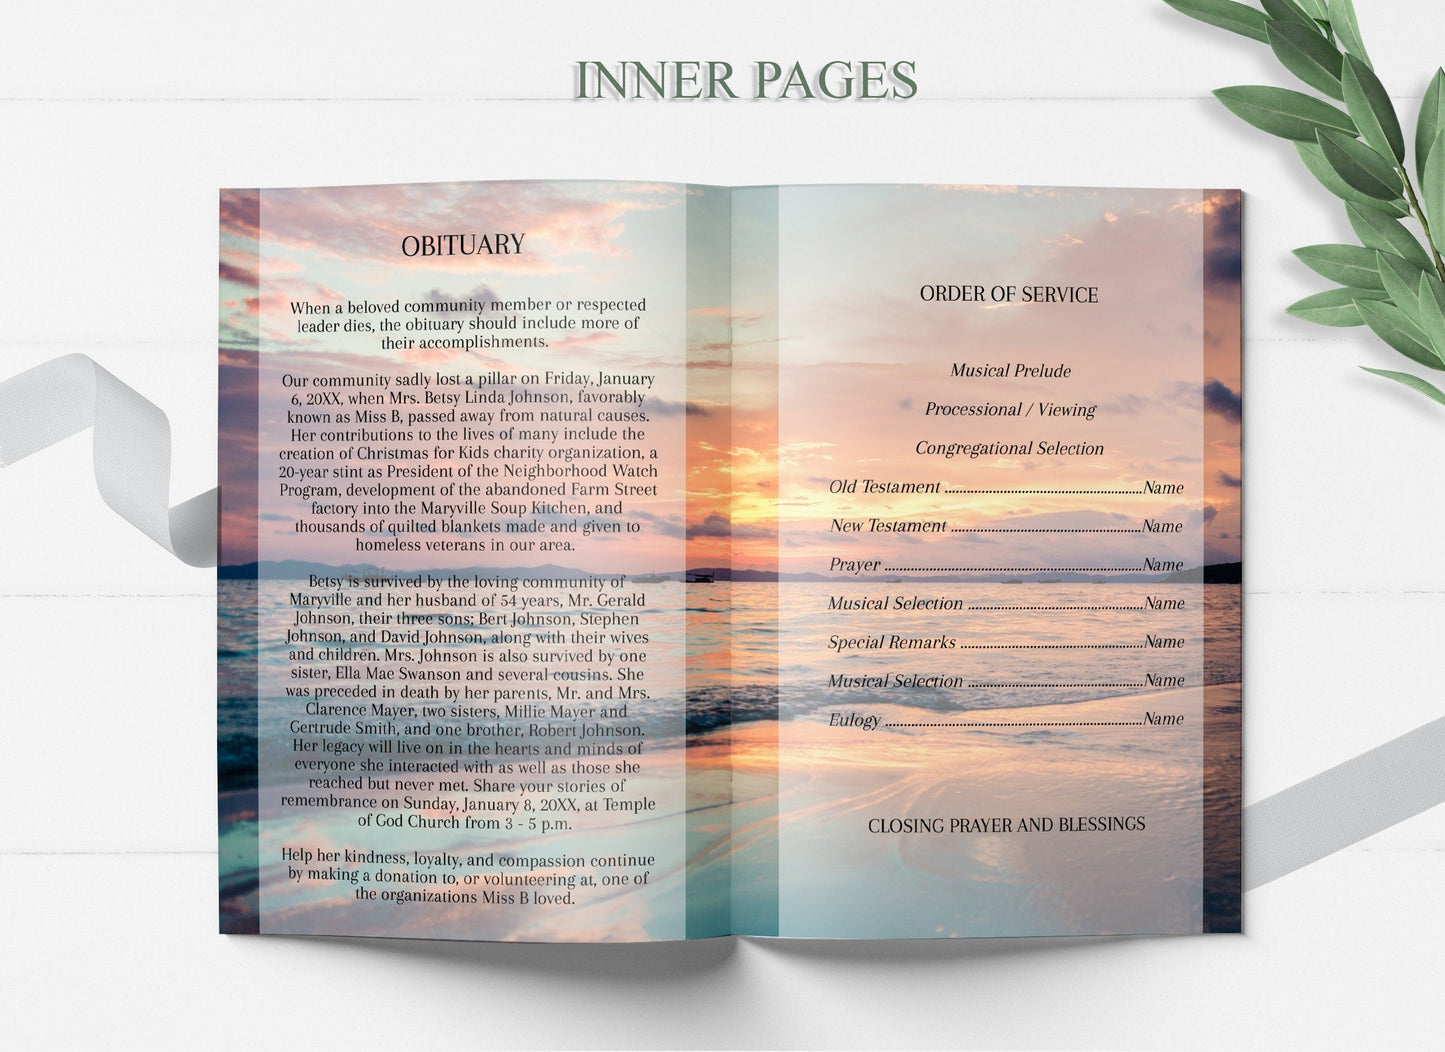 Obituary template inside funeral program along with order of service 